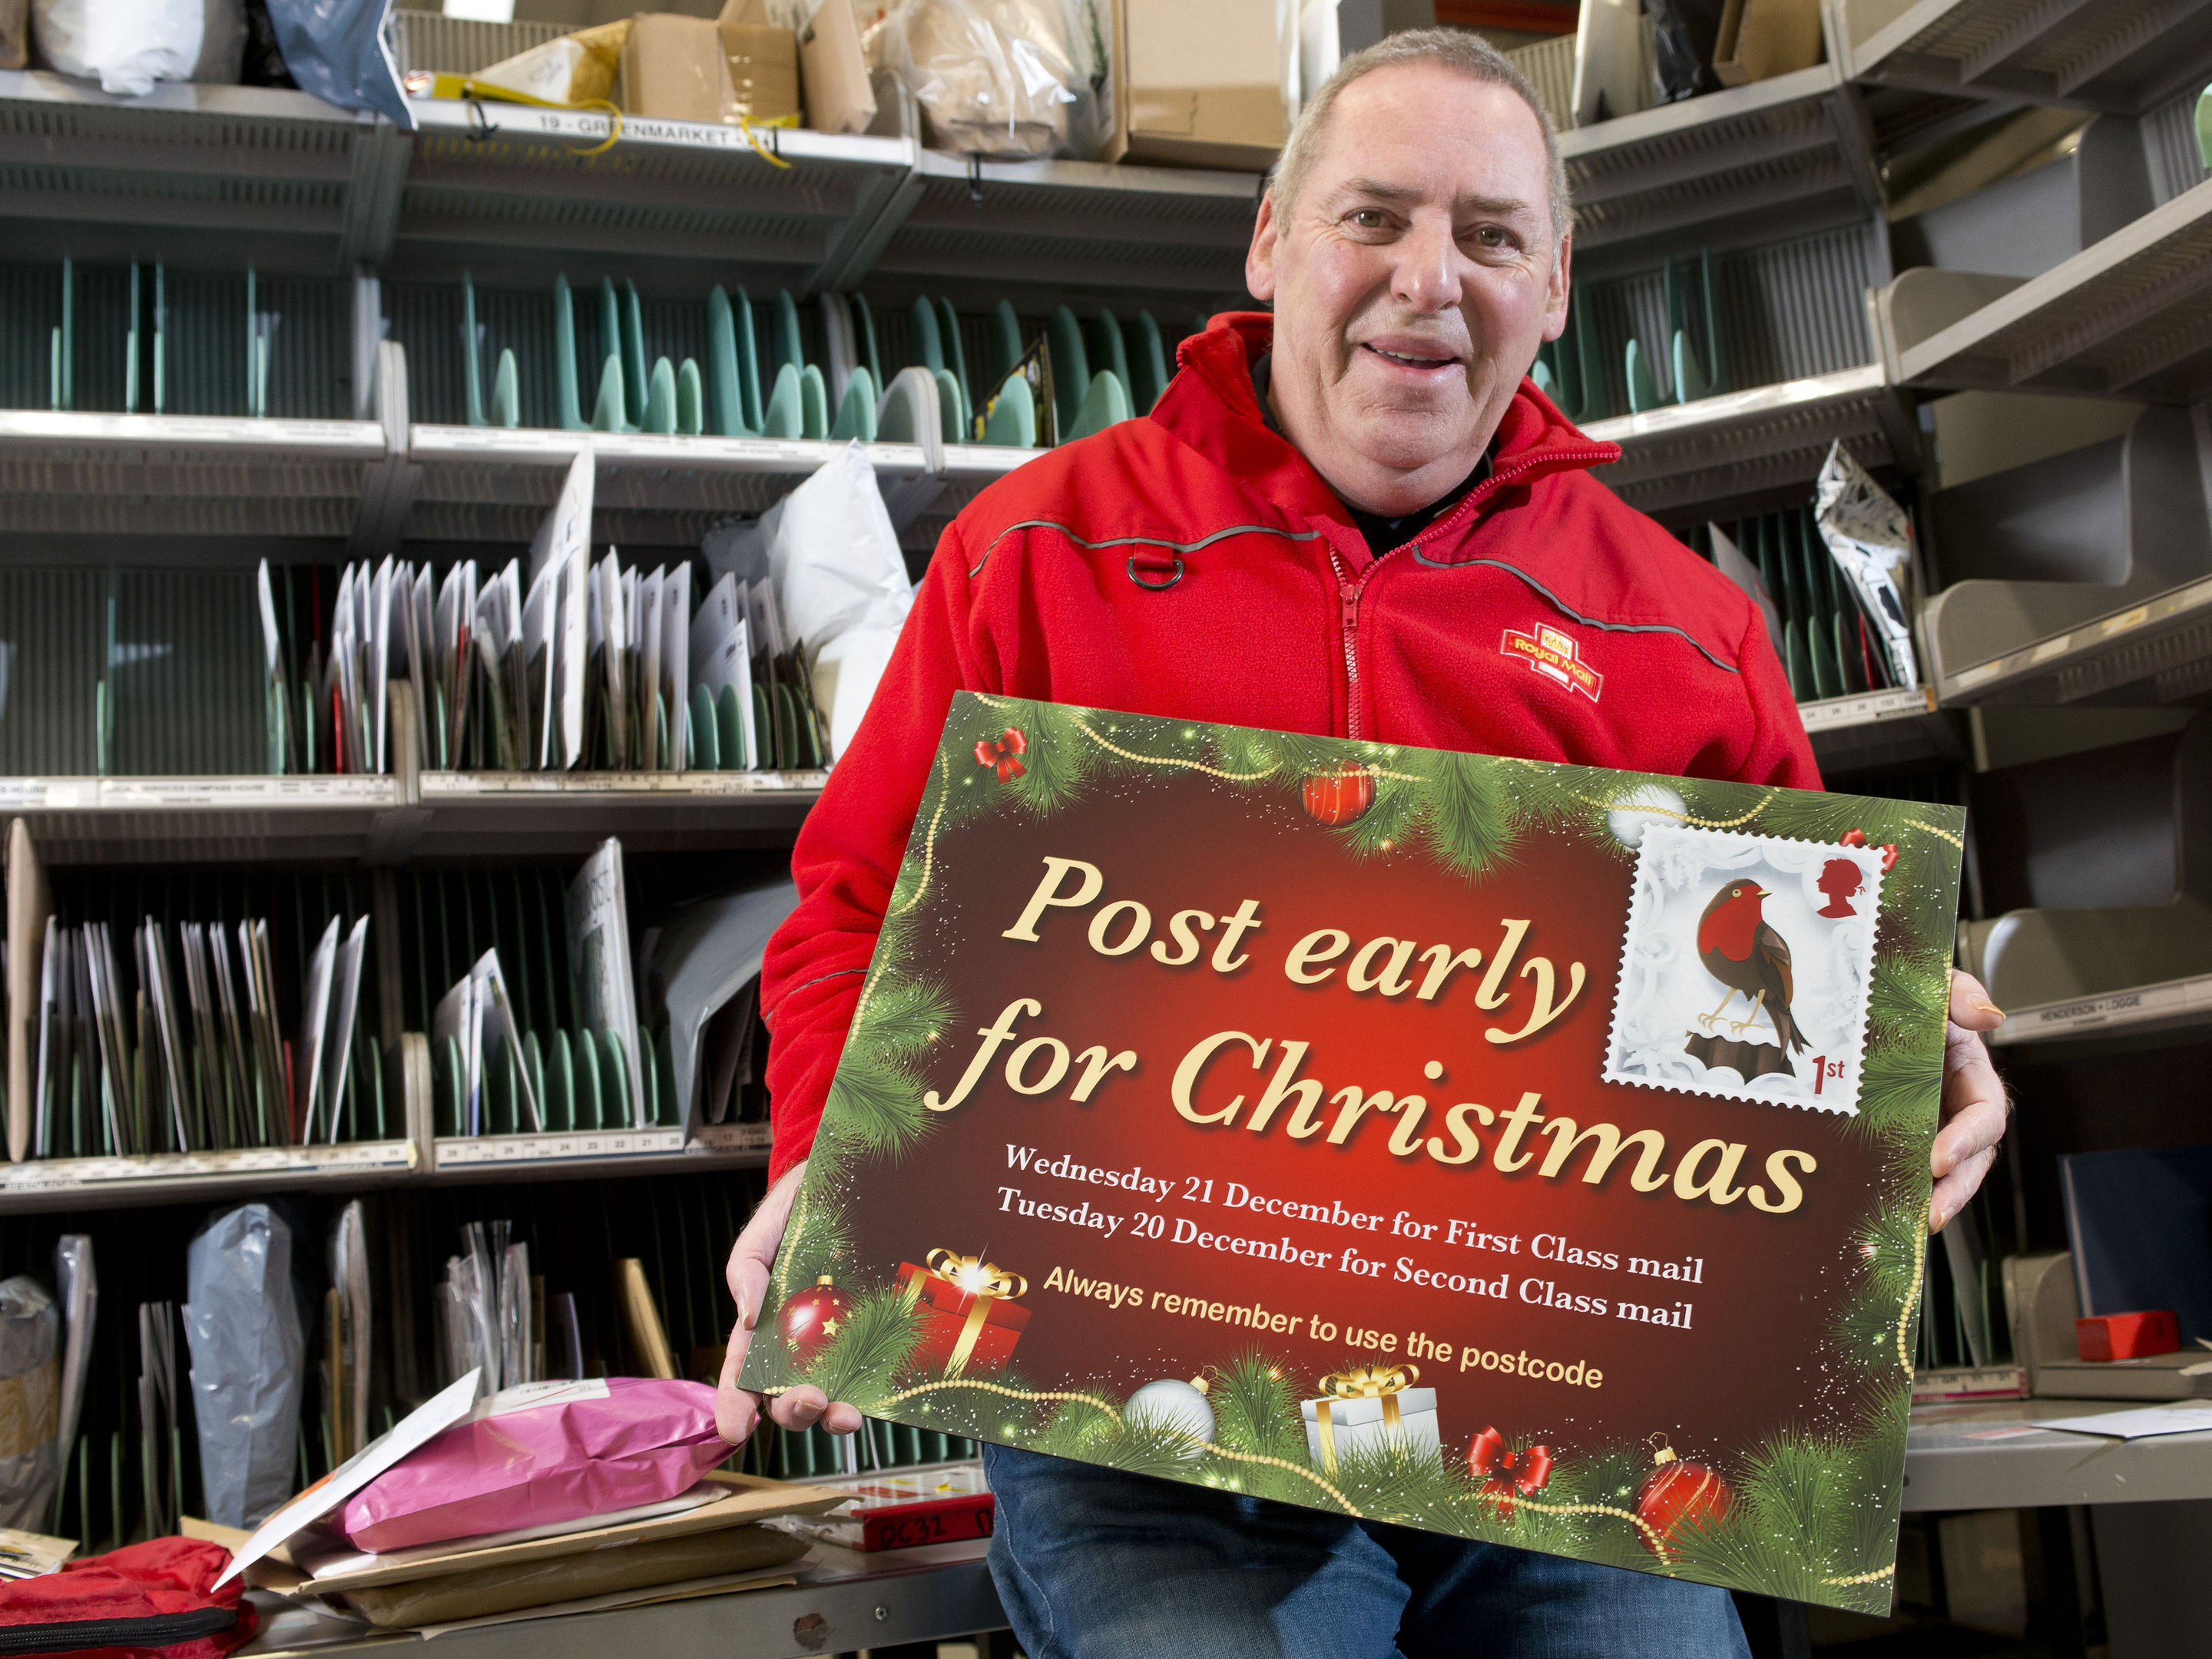 Rab Storrie, 68, has worked for Royal Mail for more than 50 years